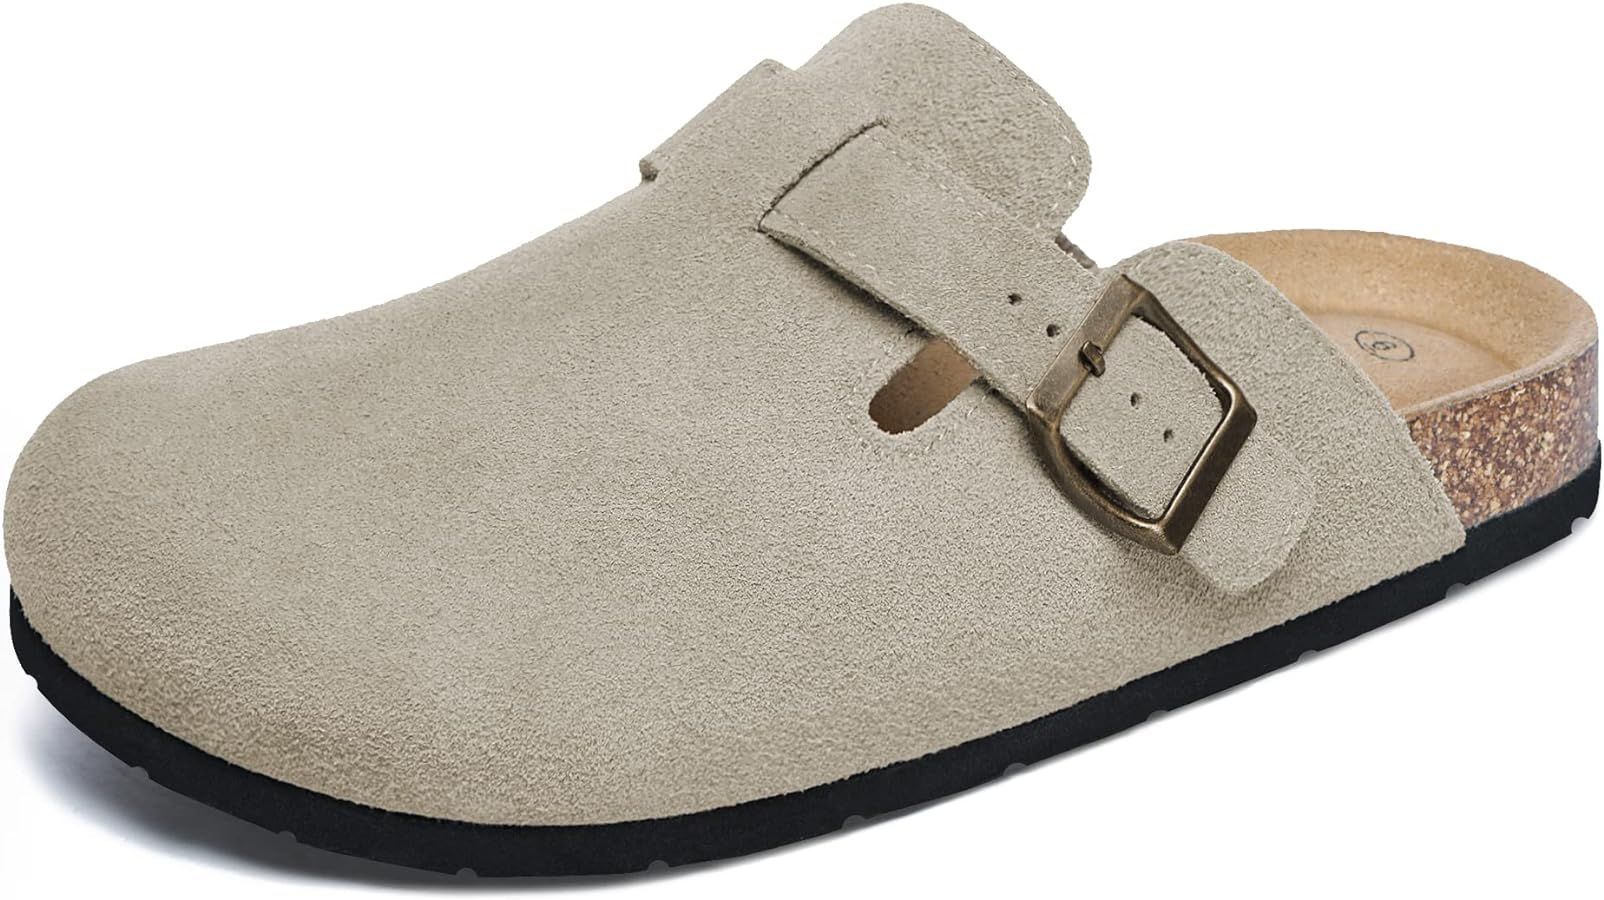 Women's Suede Clogs Adjustable Buckle Slip on Footbed Home Clog Slippers | Amazon (US)